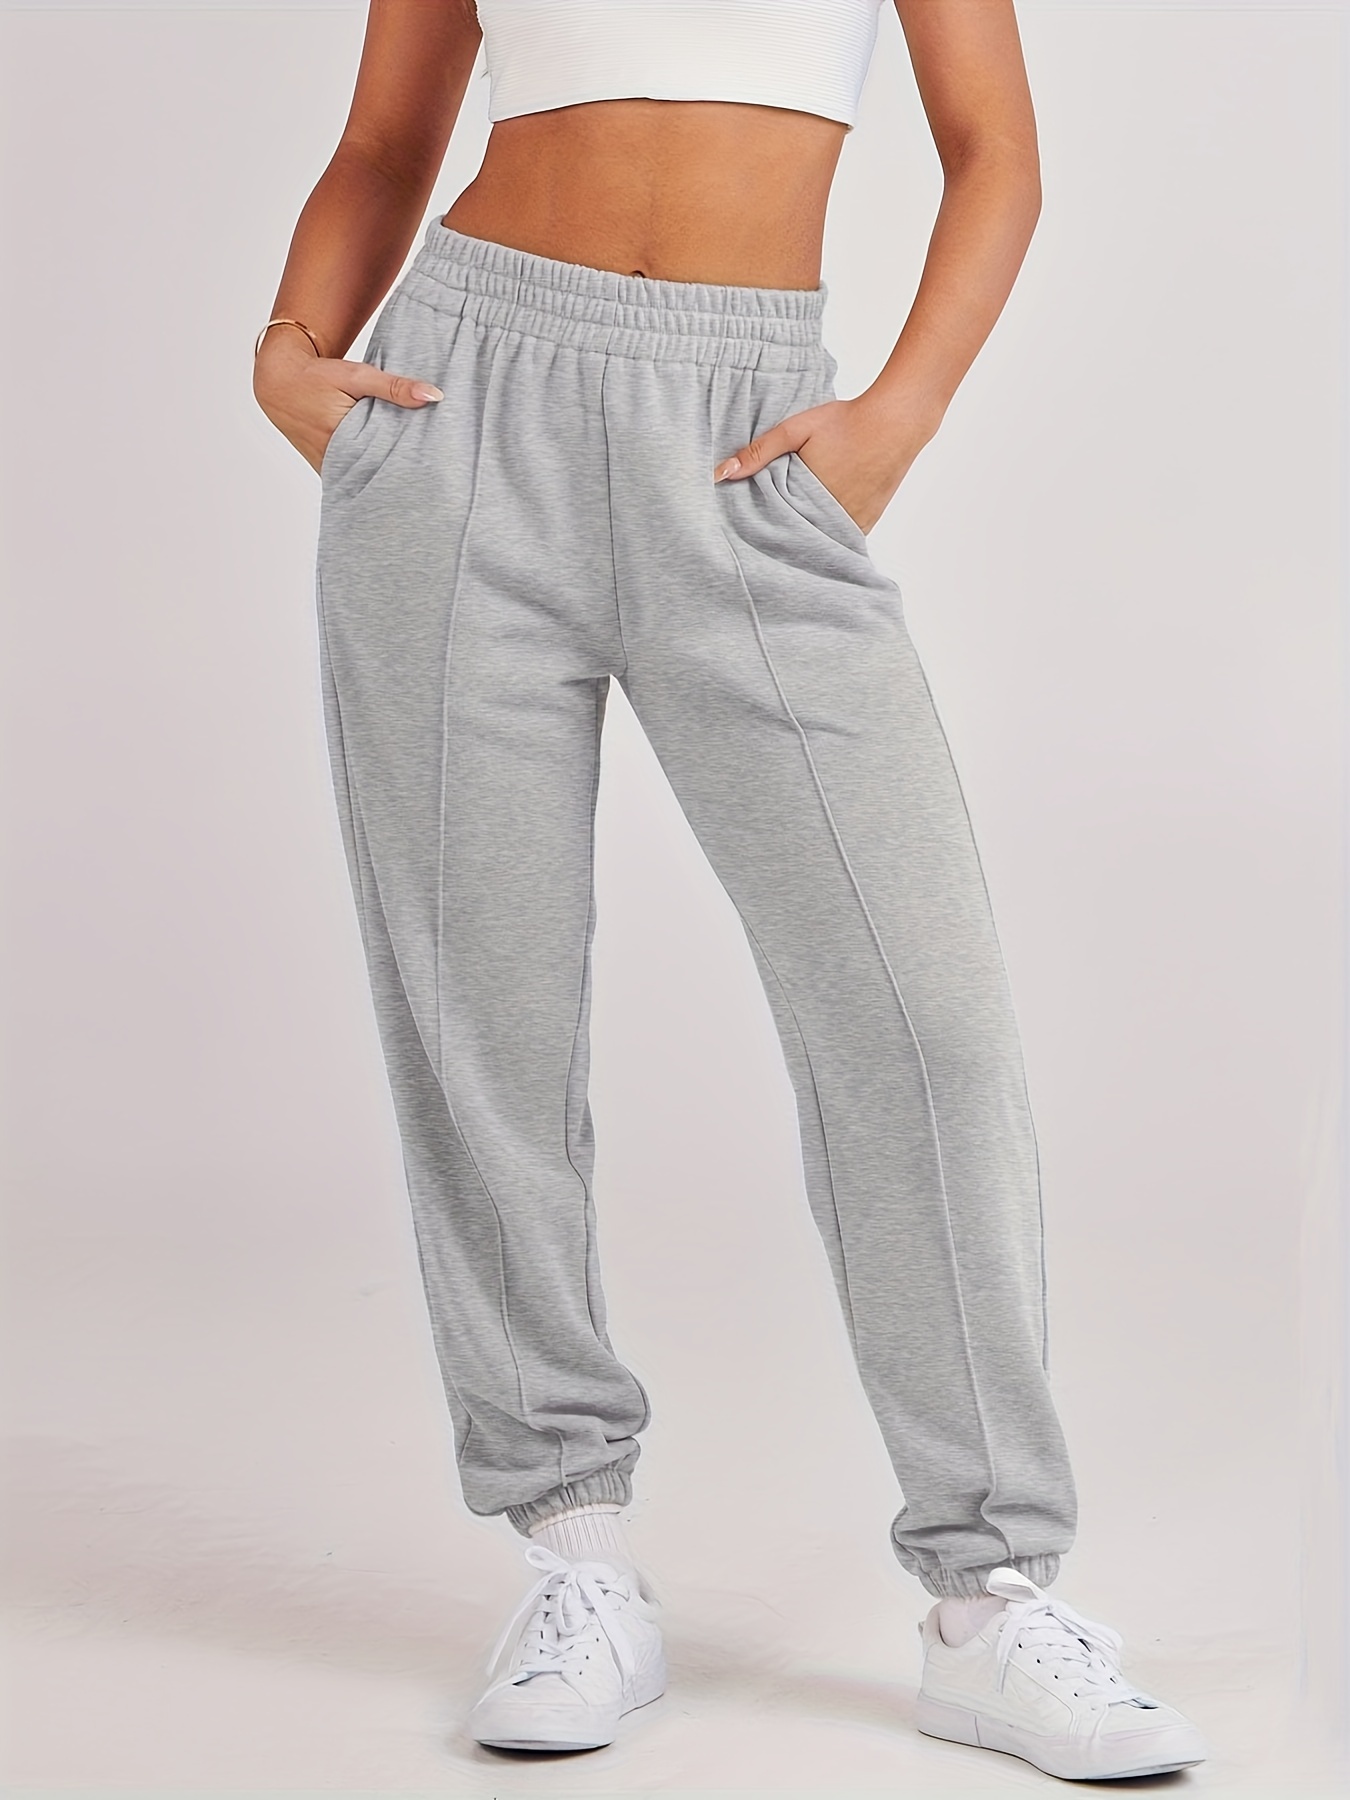 Fleece Elastic Waist Casual Sports Pants, Solid Color Workout Loose Joggers  Sweatpants With Pocket, Women's Athleisure